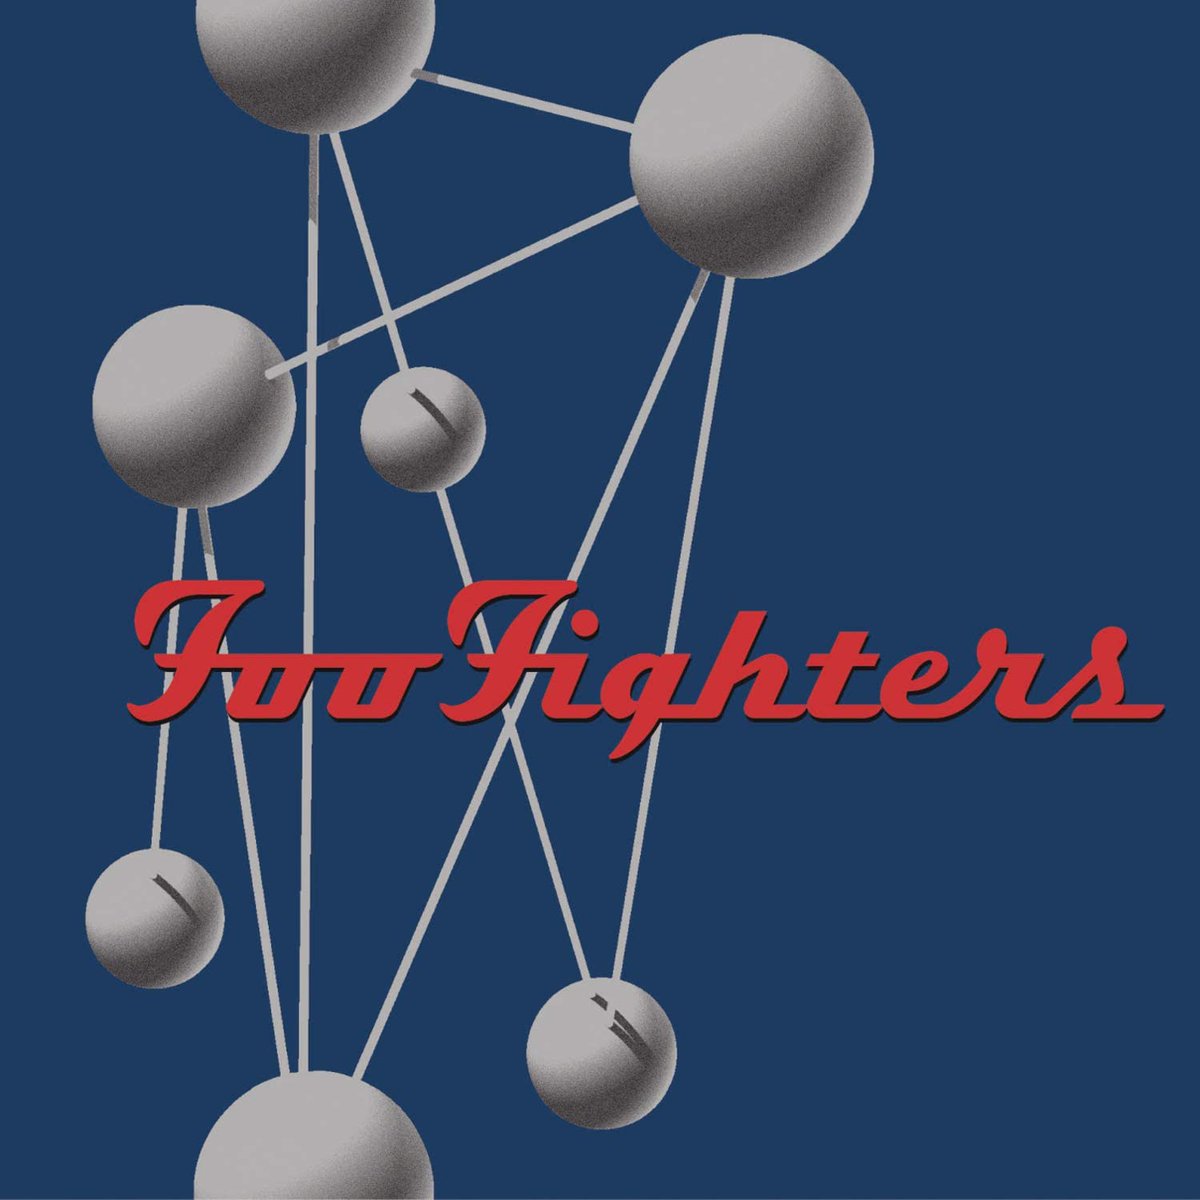 On this day in 1997, @foofighters released their second studio album, The Colour and the Shape

A change from the self titled debut that was recorded in full by #DaveGrohl he recruited a full band for this.  A superb album that reached #3 in the UK charts & produced by @gilnorton